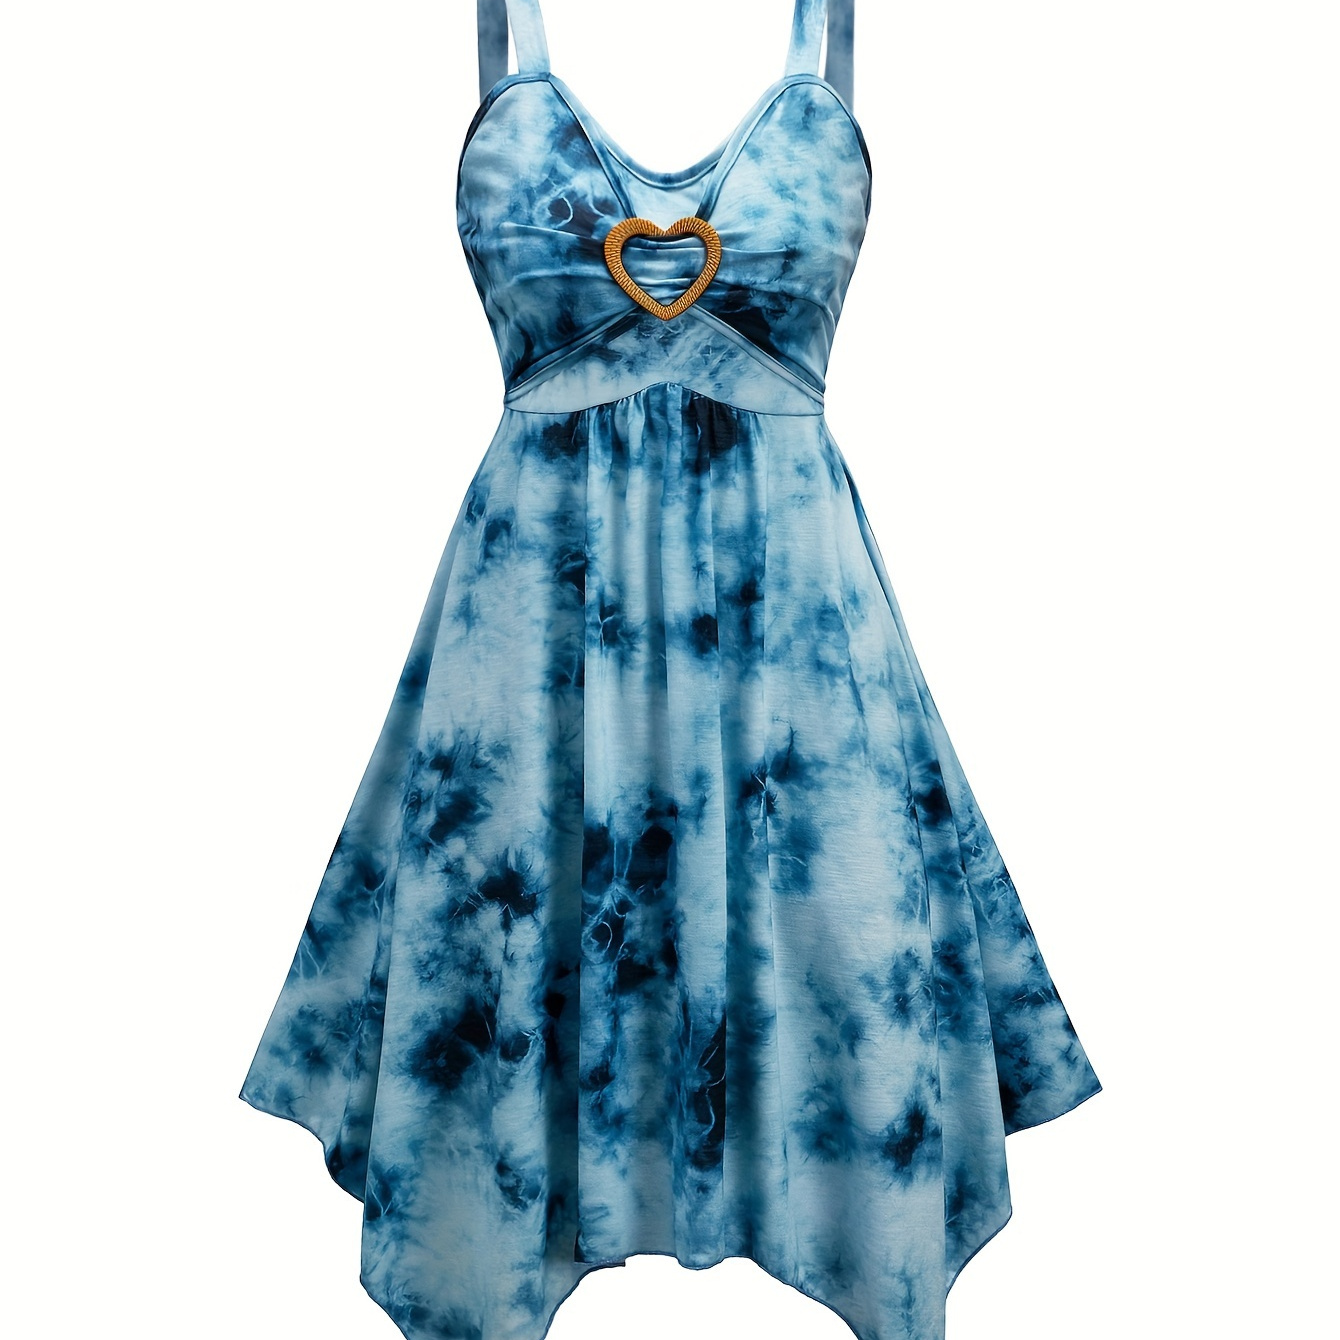 

Tie Dye Sweetheart Neck Dress, Casual Backless Sleeveless Heart Decor A-line Dress For Spring & Summer, Women's Clothing